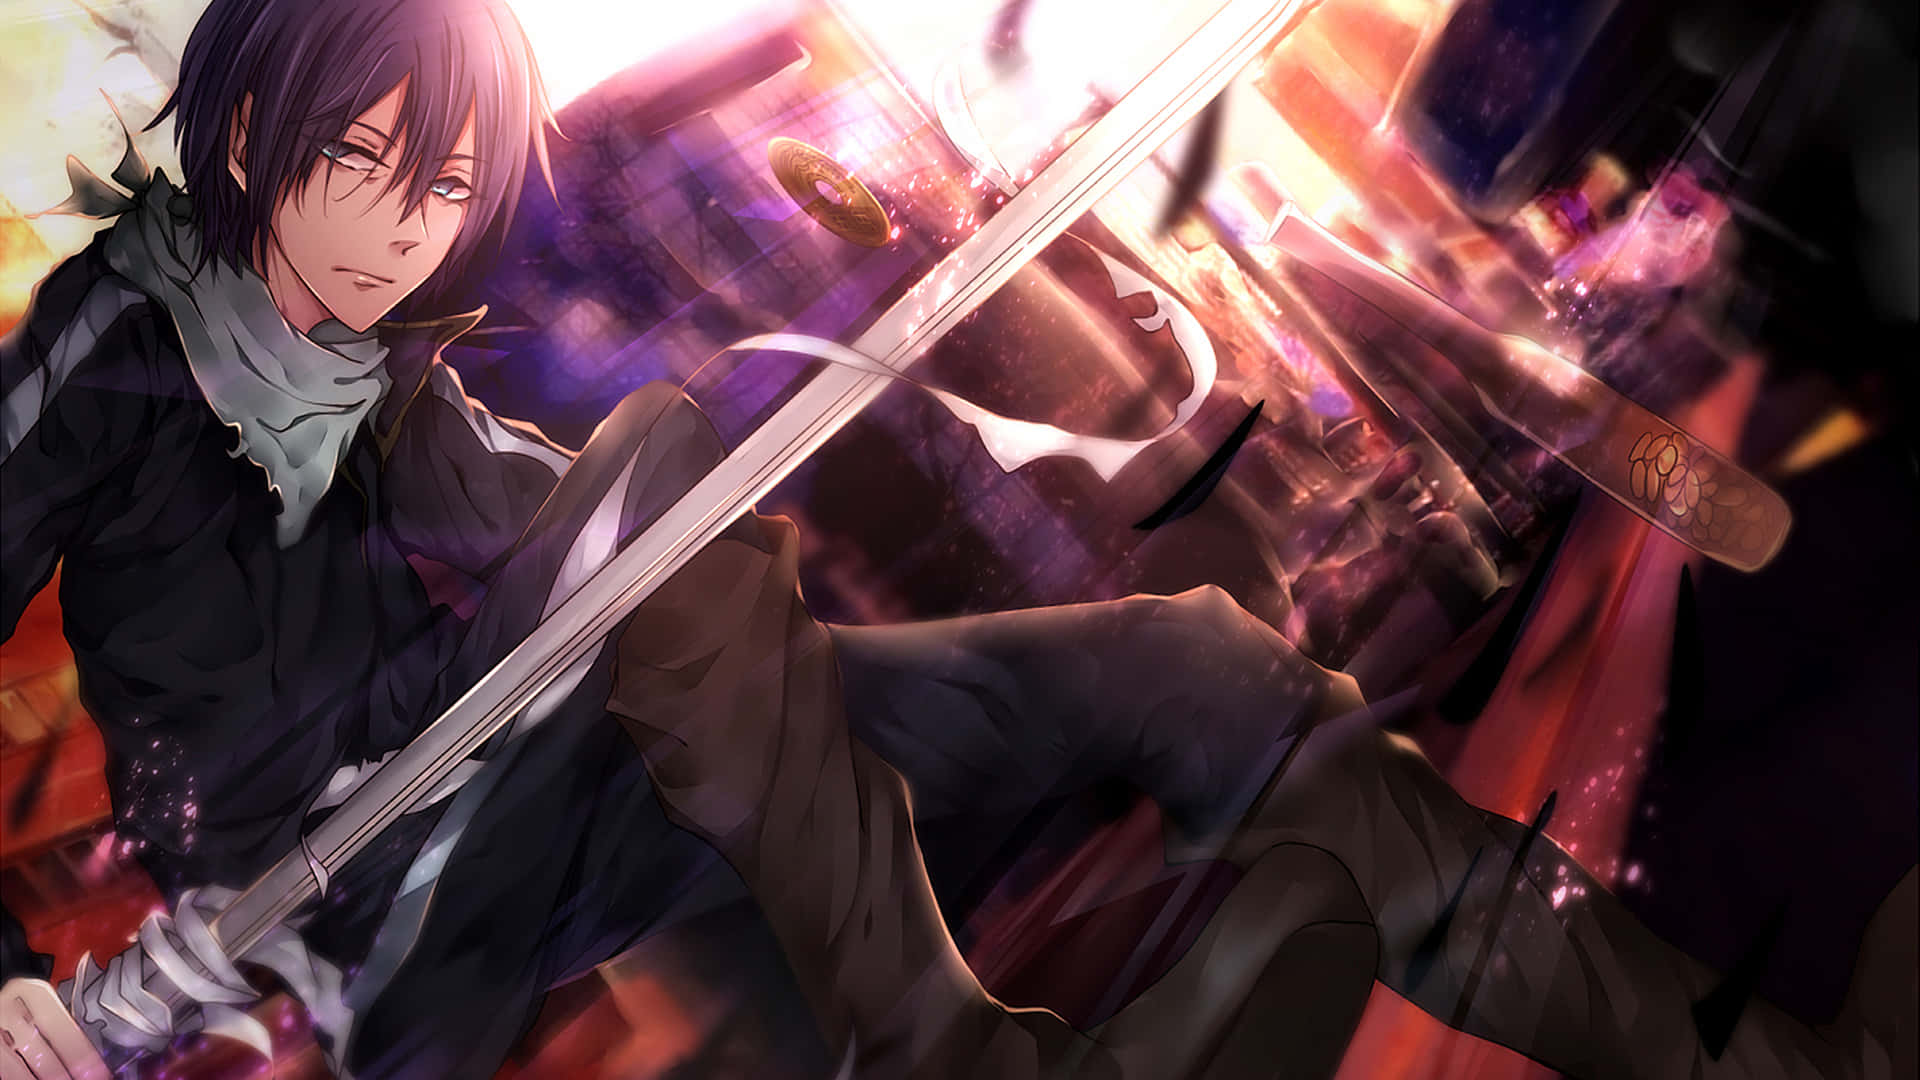 Yato prepares for battle in the supernatural world of Noragami